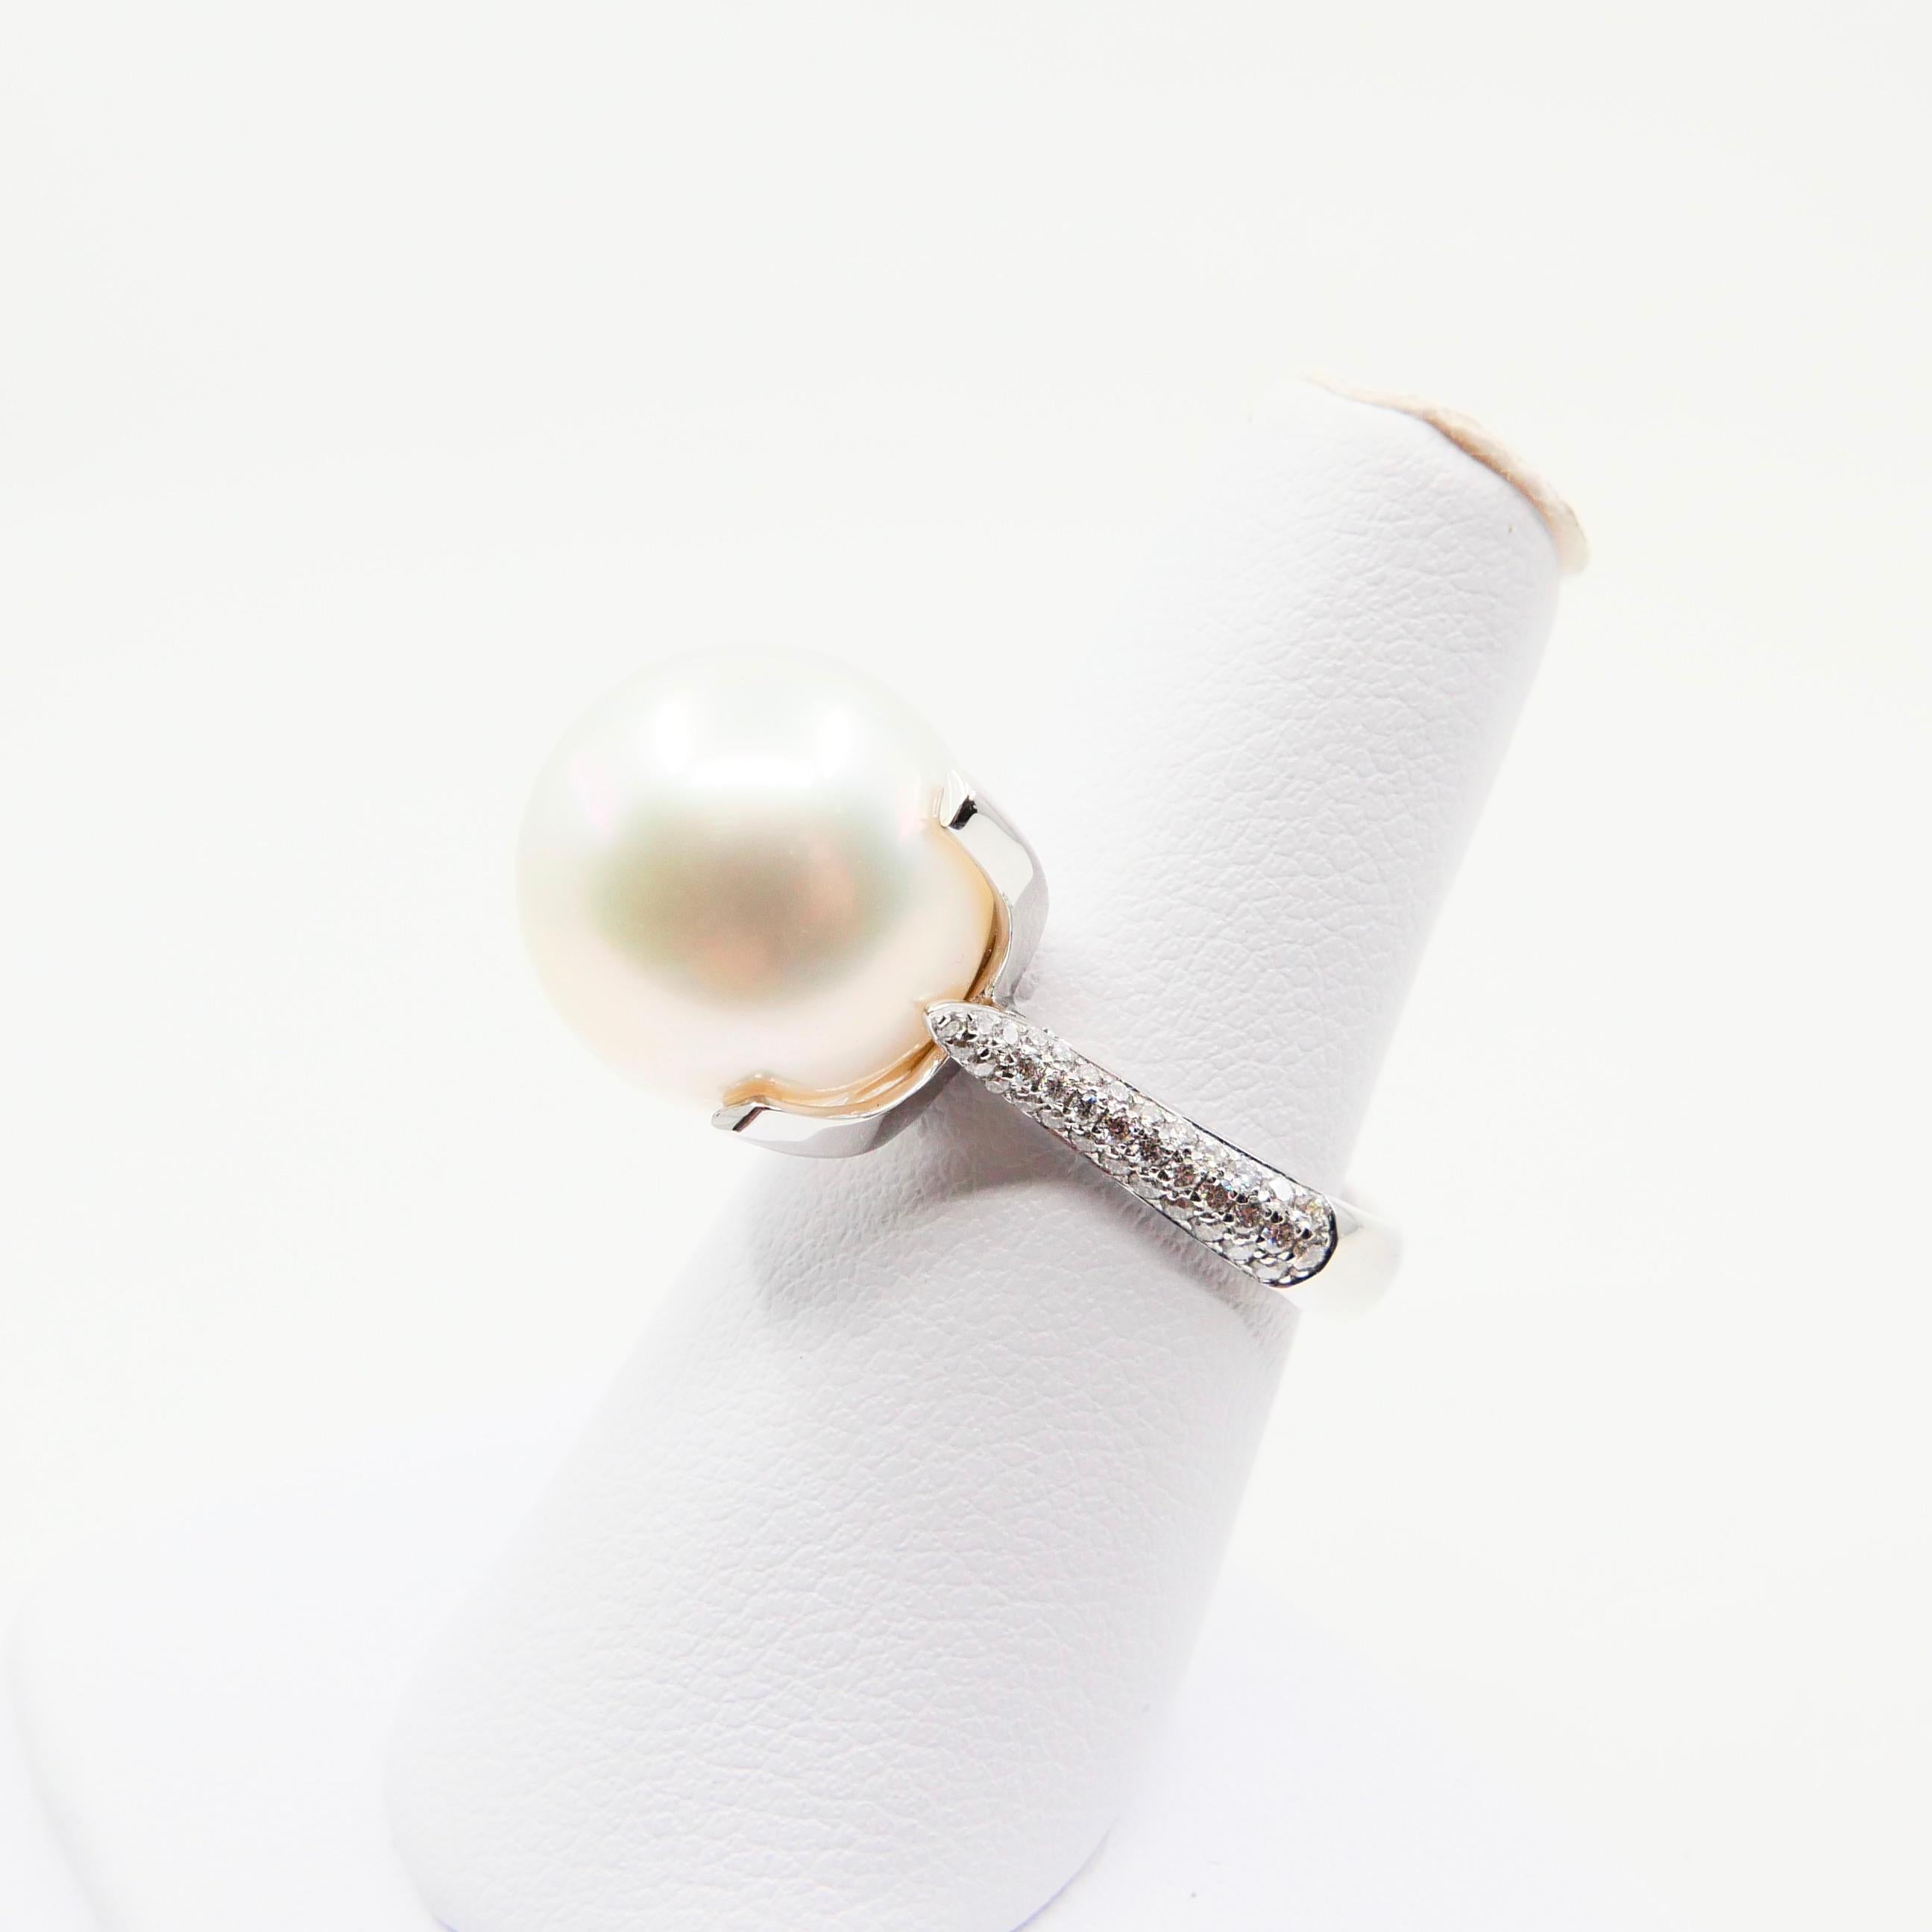 Certified South Sea Pearl and Diamond Ring, Our Signature Design 6